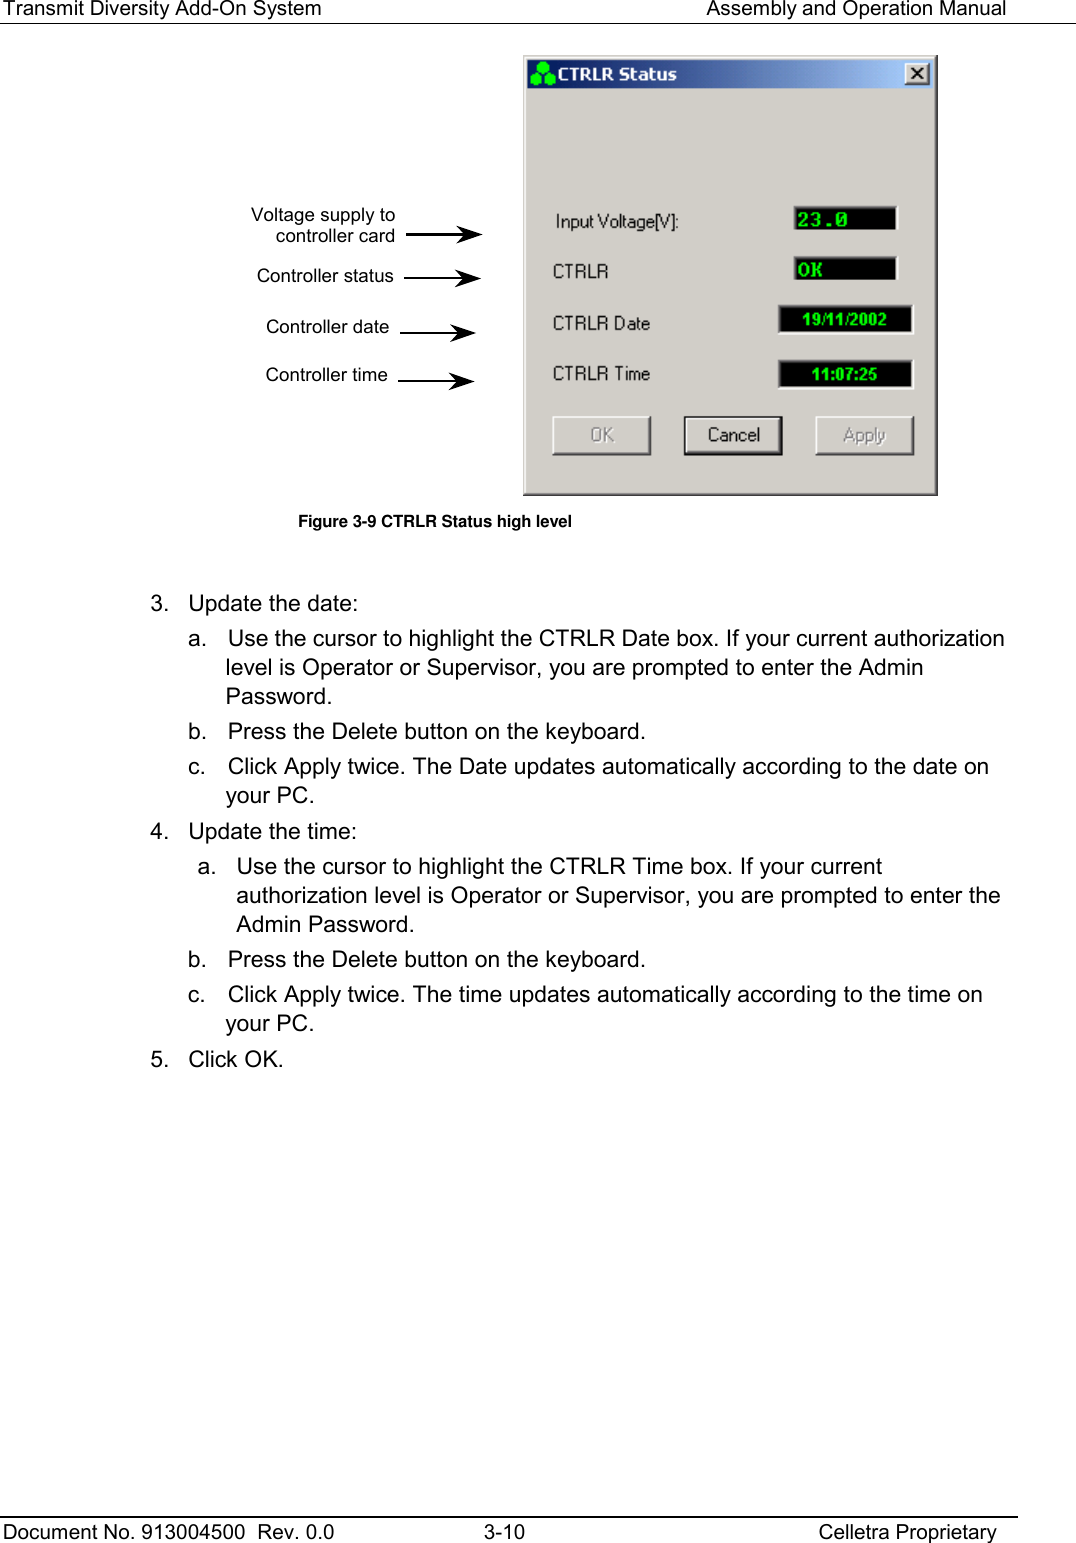 Transmit Diversity Add-On System   Assembly and Operation Manual  Document No. 913004500  Rev. 0.0  3-10  Celletra Proprietary   Figure  3-9 CTRLR Status high level  3.  Update the date: a.  Use the cursor to highlight the CTRLR Date box. If your current authorization level is Operator or Supervisor, you are prompted to enter the Admin Password.  b.  Press the Delete button on the keyboard. c.  Click Apply twice. The Date updates automatically according to the date on your PC. 4.  Update the time: a.  Use the cursor to highlight the CTRLR Time box. If your current authorization level is Operator or Supervisor, you are prompted to enter the Admin Password.  b.  Press the Delete button on the keyboard. c.  Click Apply twice. The time updates automatically according to the time on your PC. 5. Click OK.  Voltage supply to controller card Controller status Controller date Controller time 